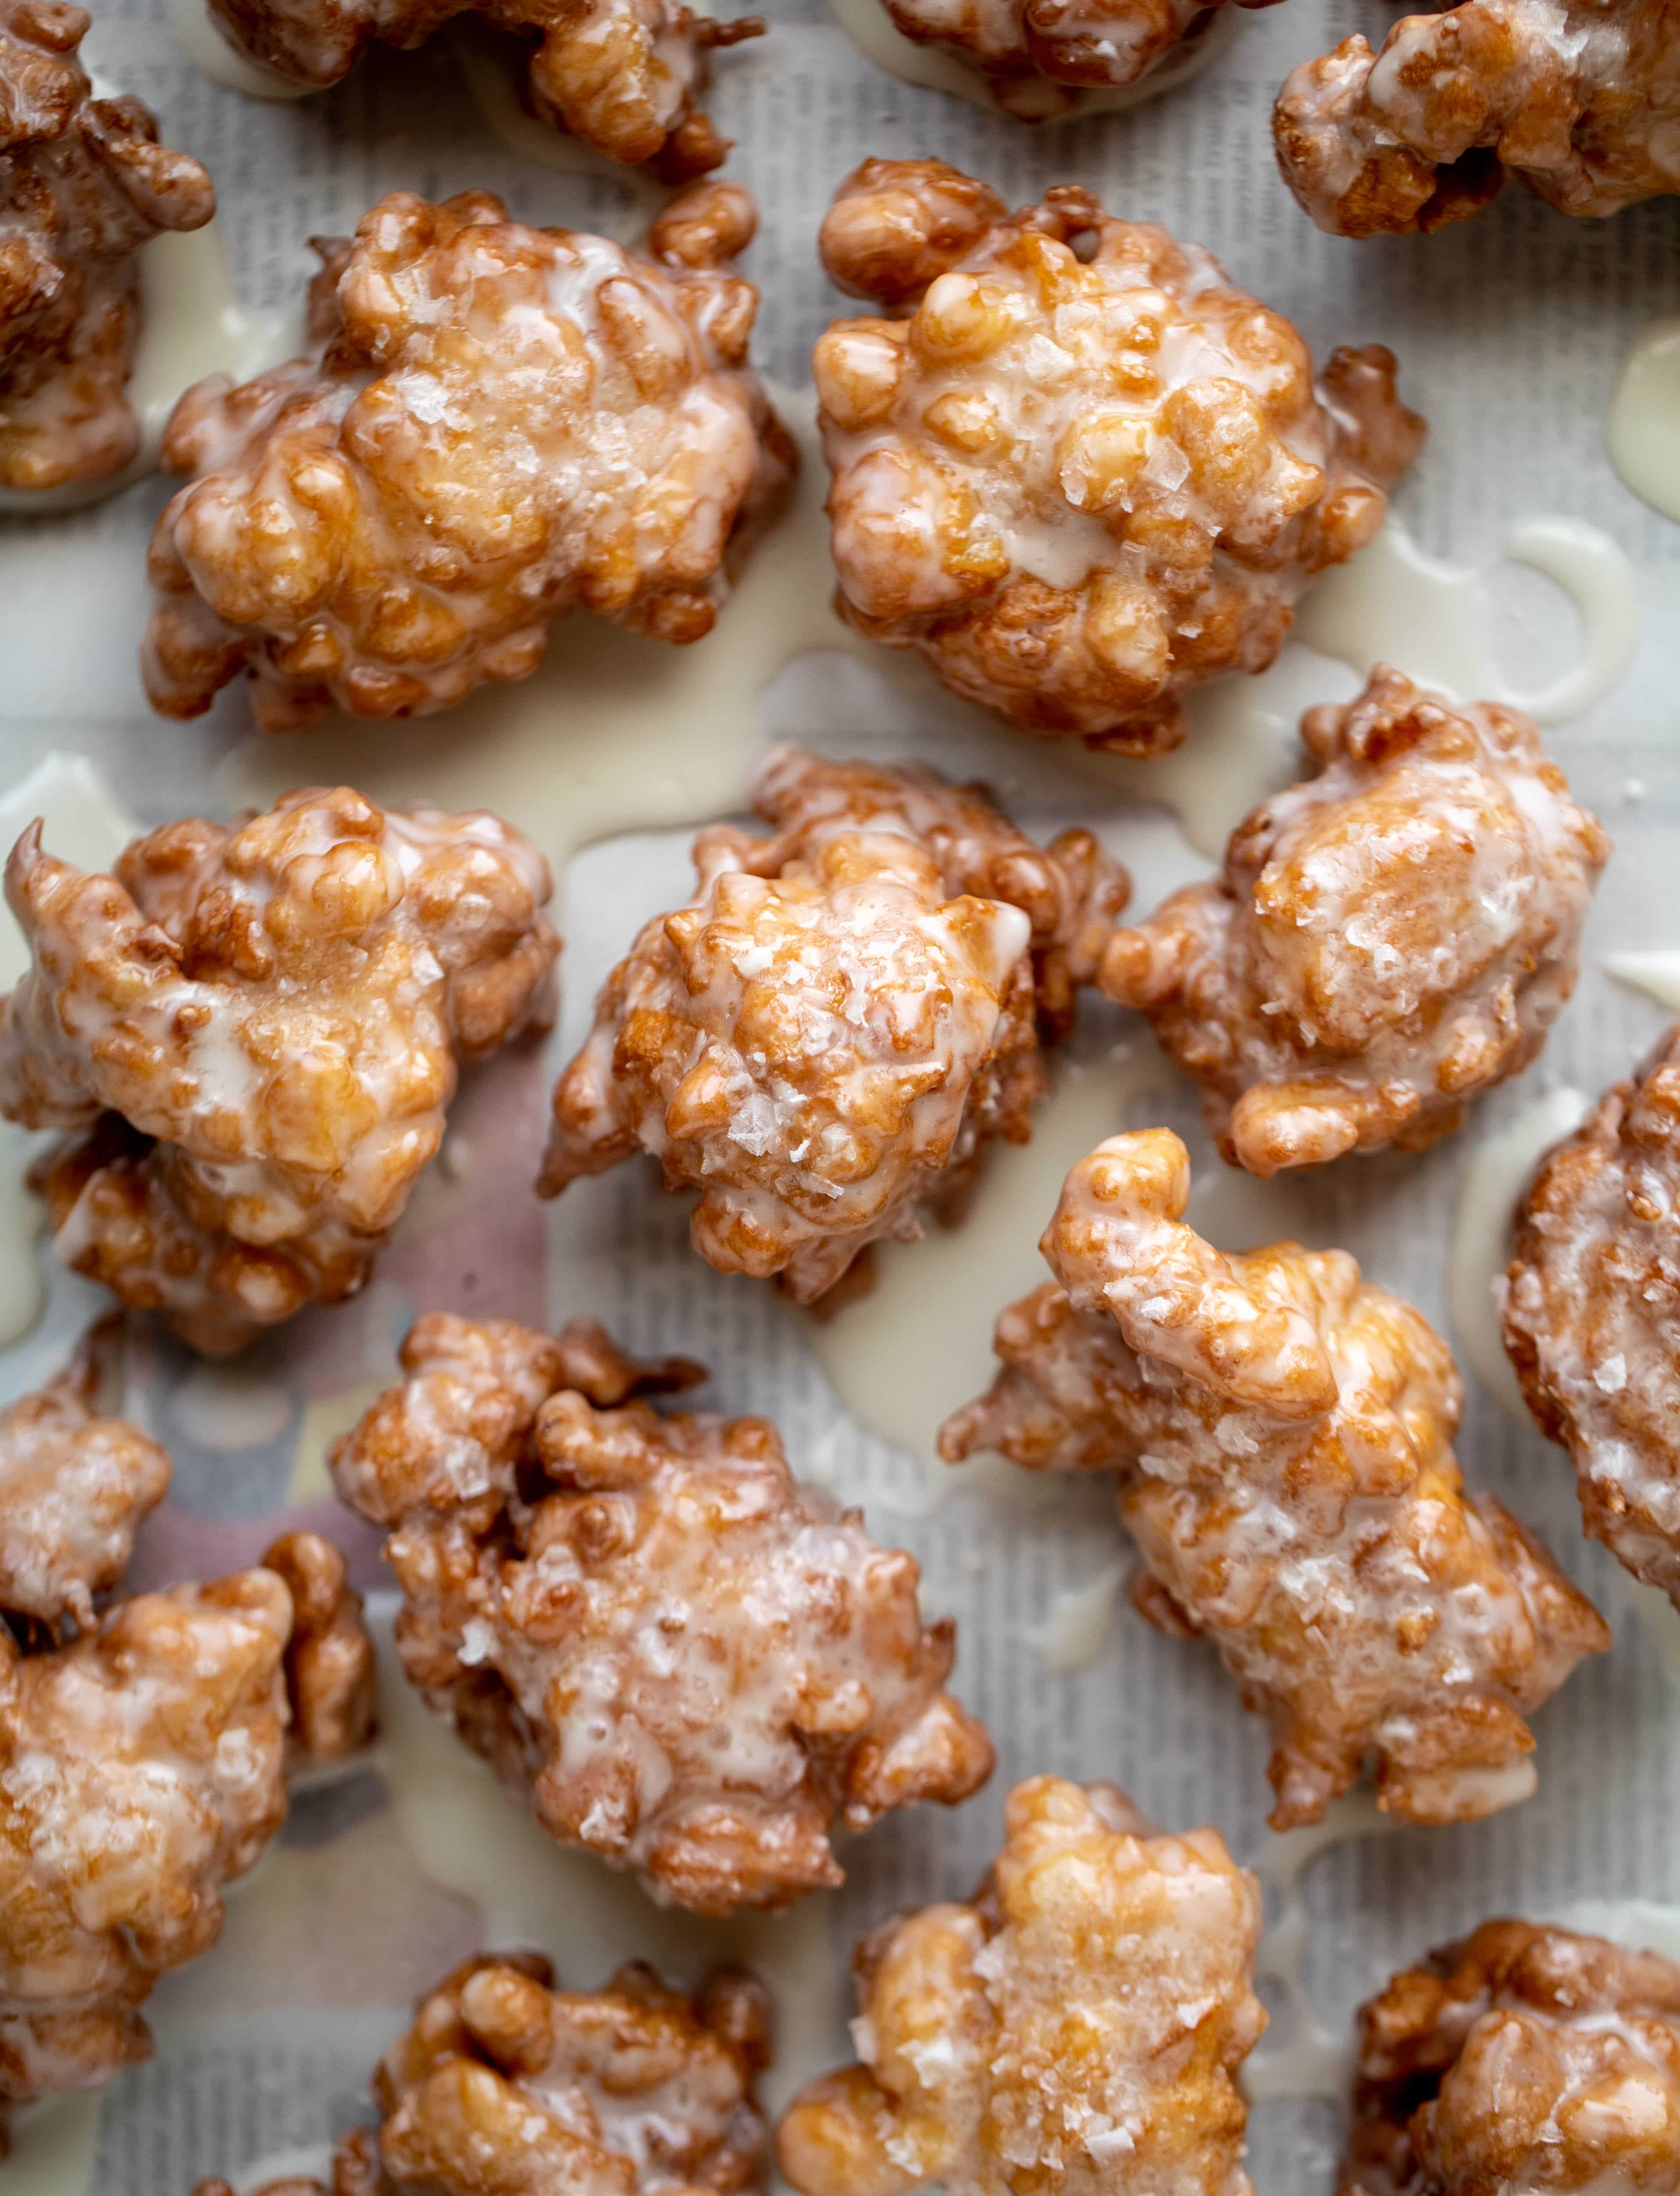 These salted apple fritters use honeycrisp apples and flaked sea salt for a fall flavor explosion. These are the best treat ever!